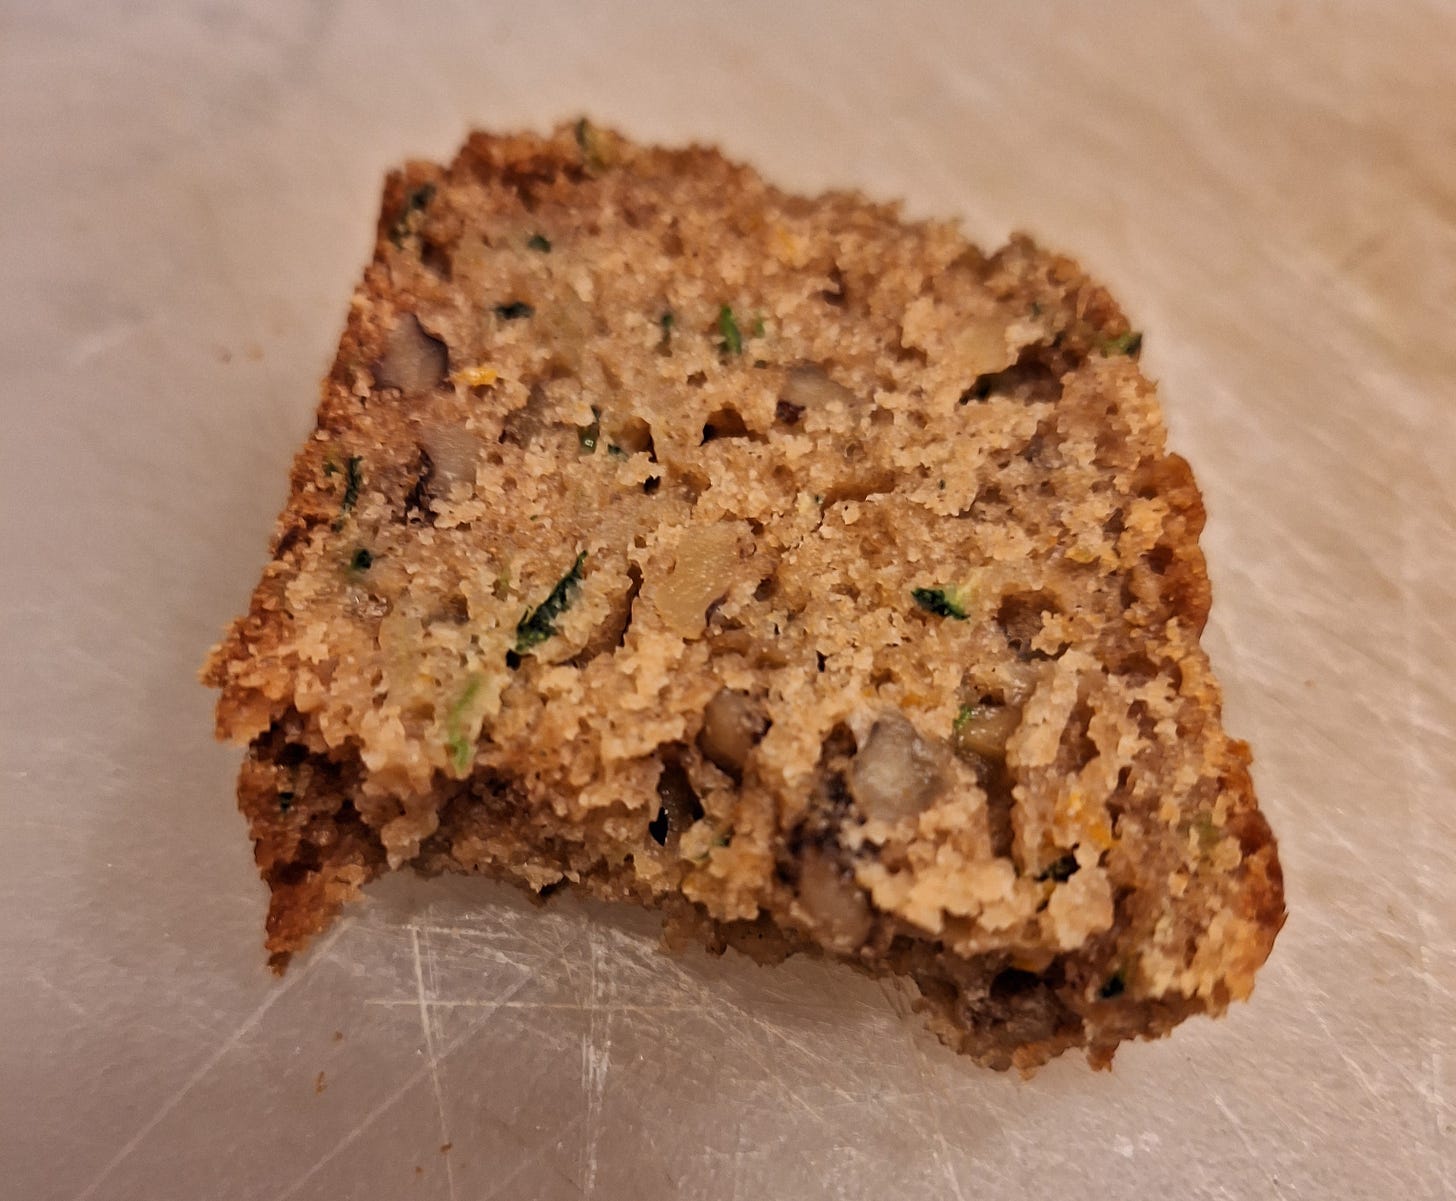 a picture of the zucchini bread I made